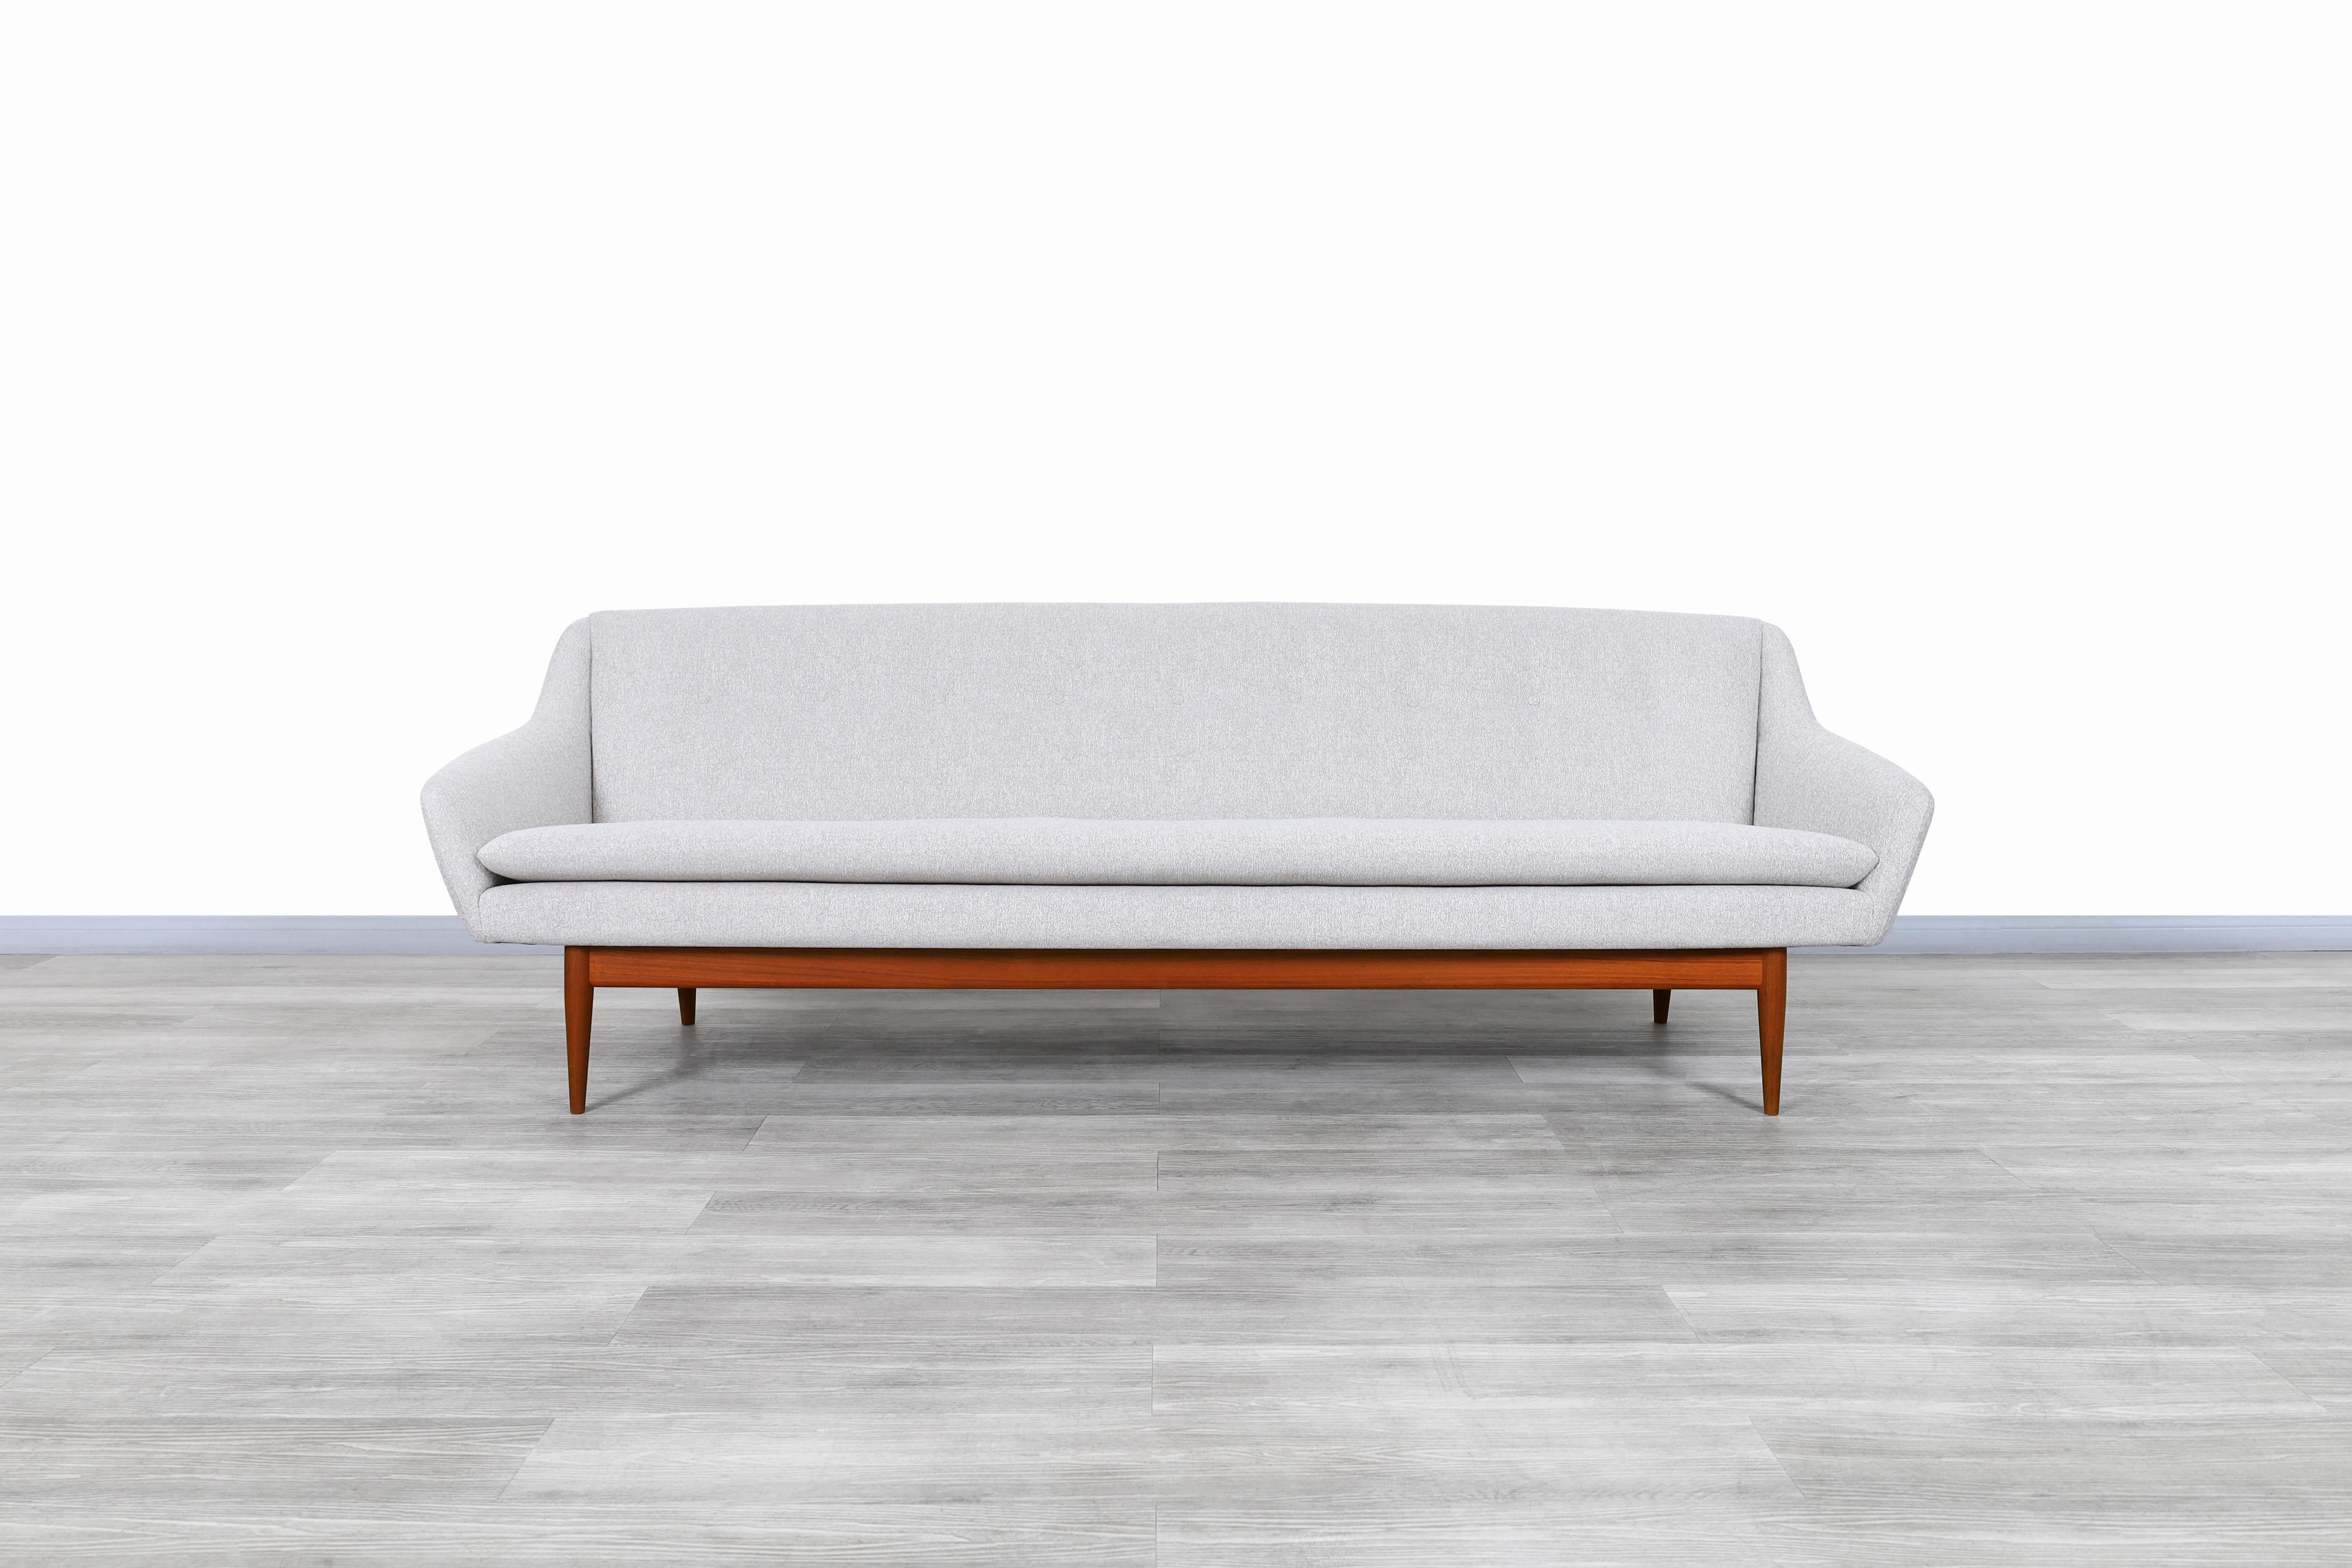 Exceptional Norwegian teak sofa designed by Gerhard Berg for LK Hjelle in Norway, circa 1960s. This sofa has a design that perfectly combines aesthetics in its figure and comfort for its use. Features a wide size seat which will comfortably seat